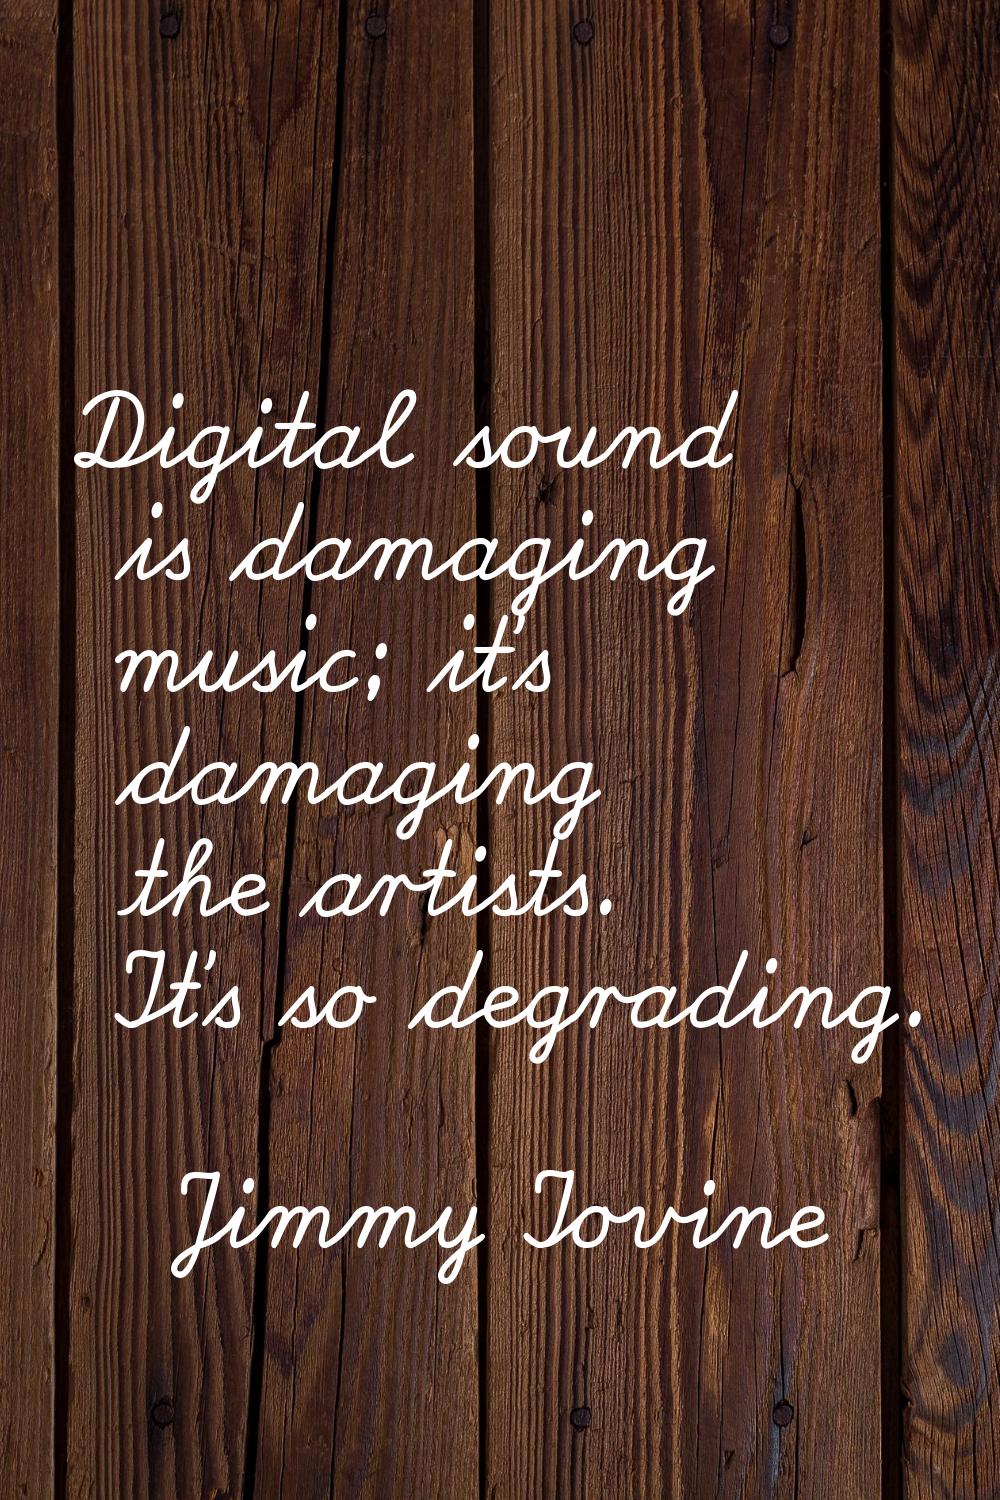 Digital sound is damaging music; it's damaging the artists. It's so degrading.